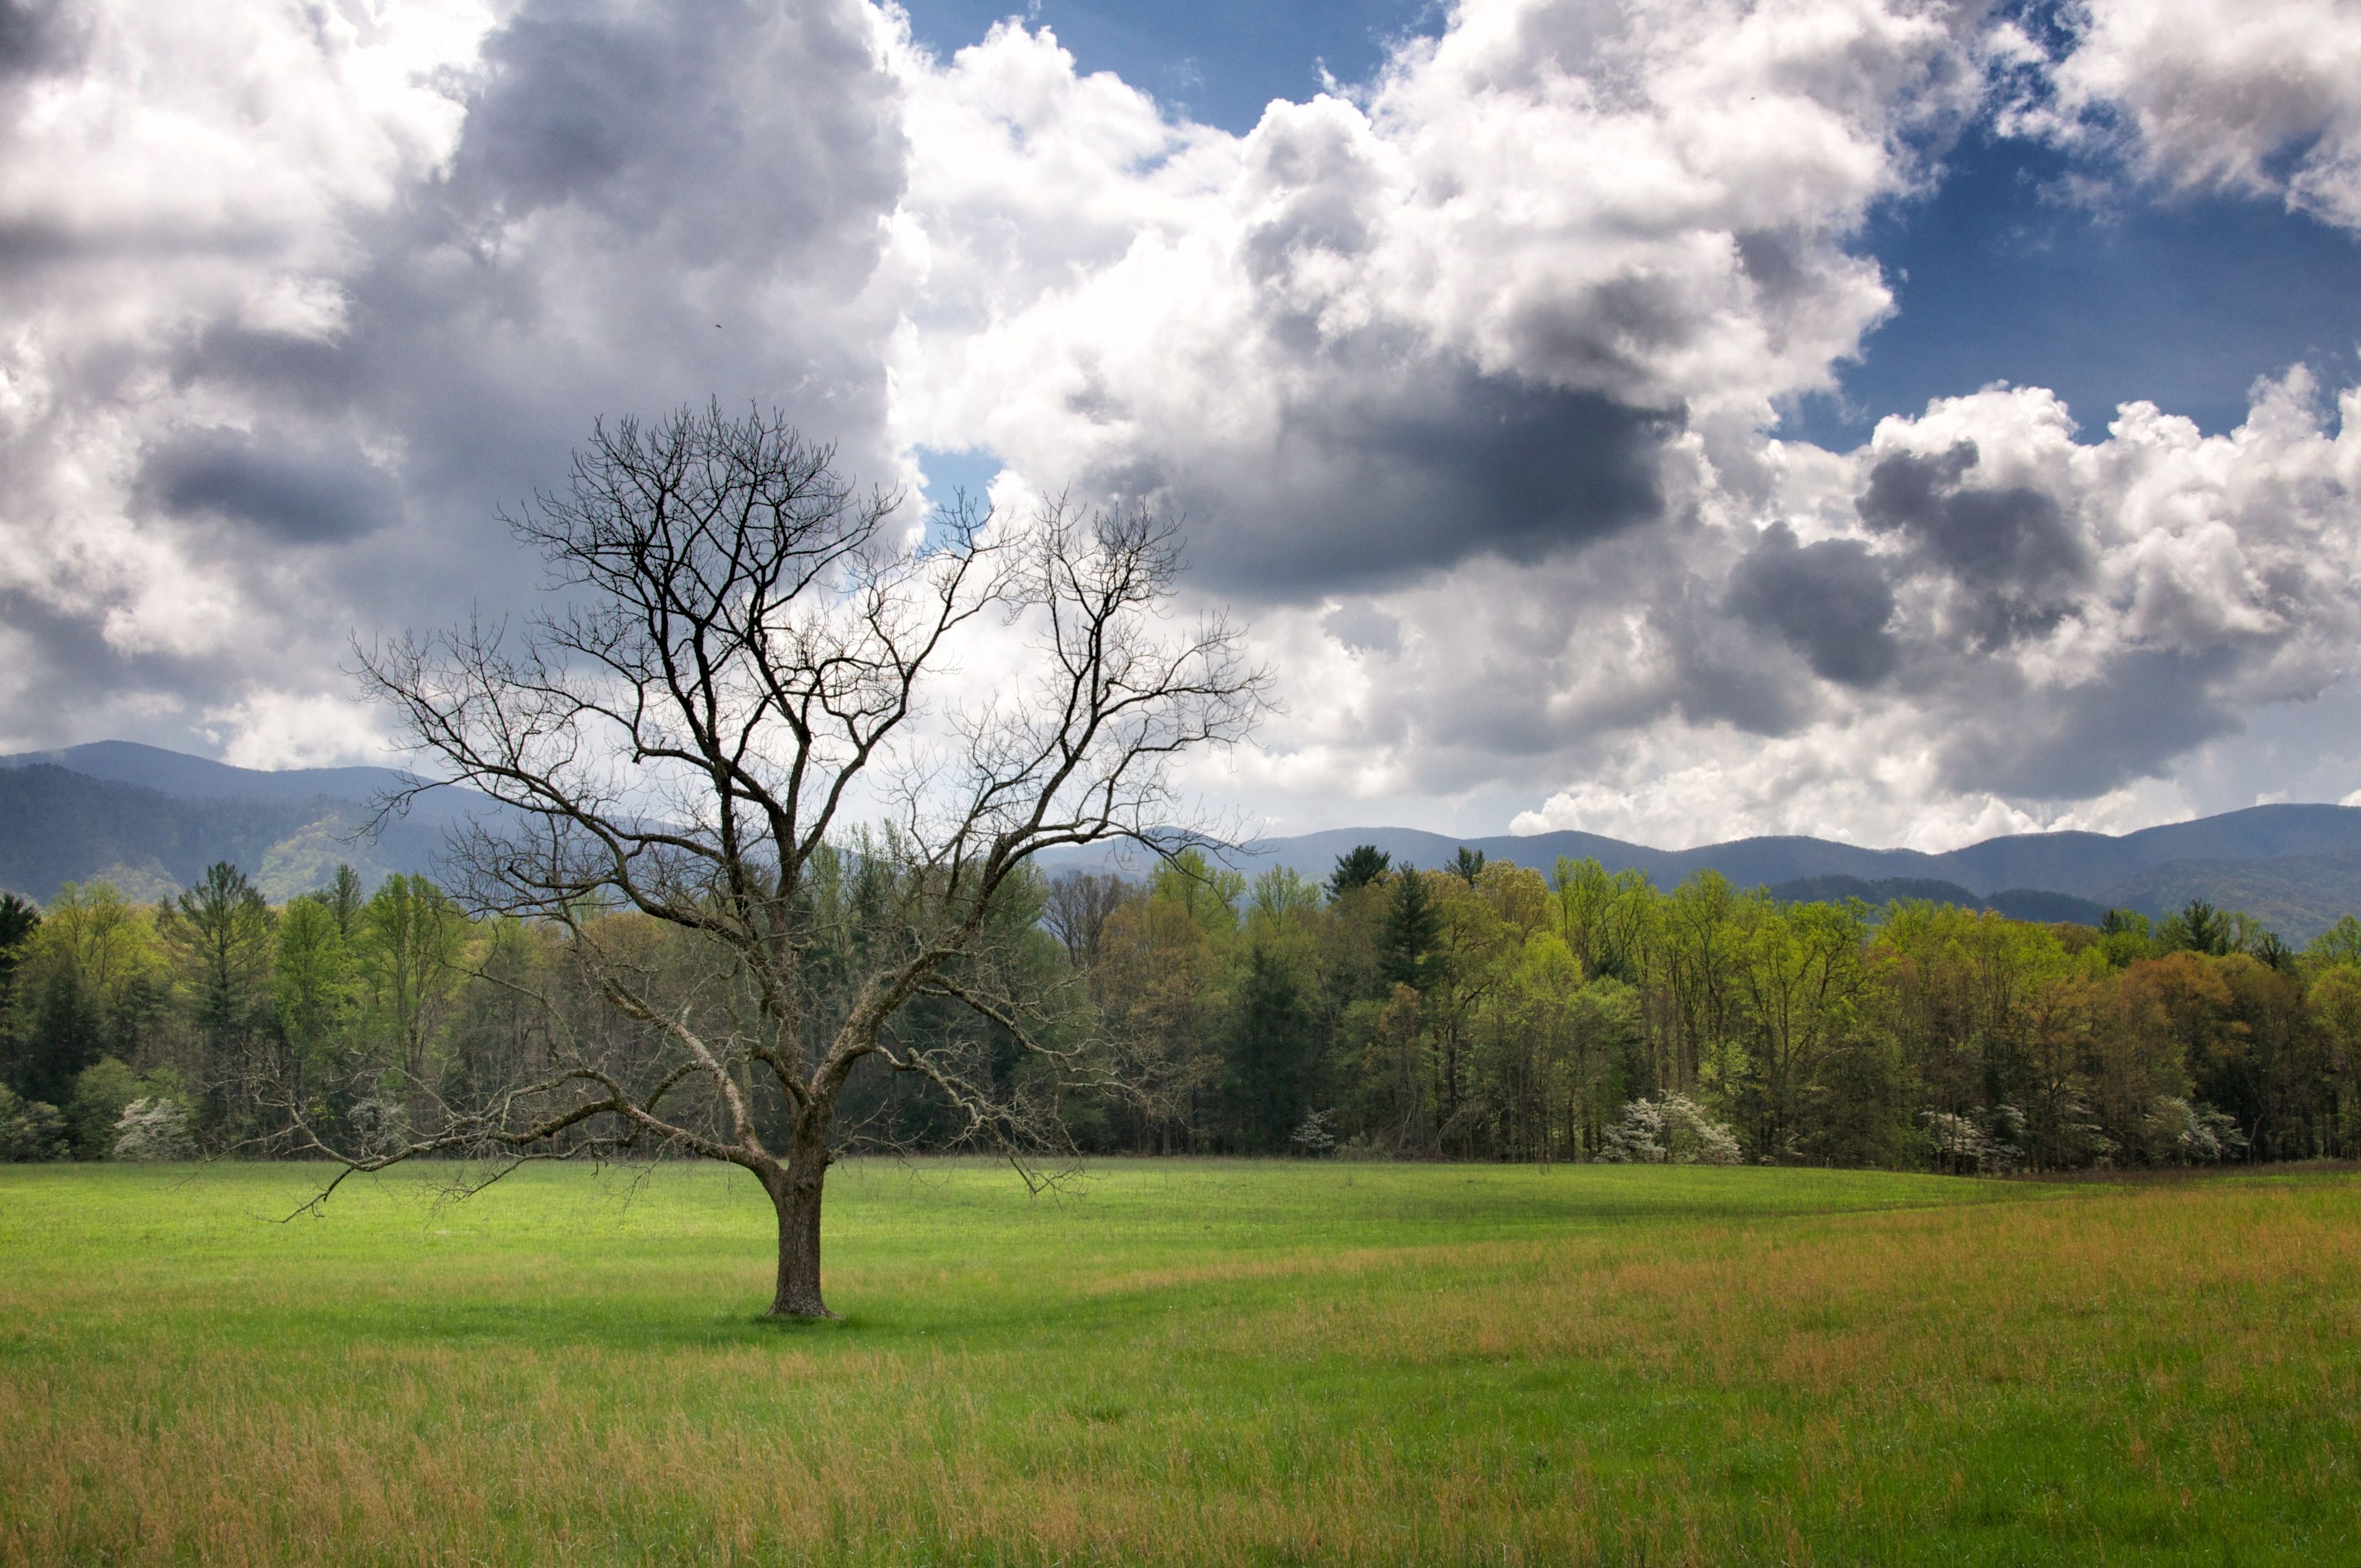 A tree stands alone in a meadow in the Great Smoky Mountains.